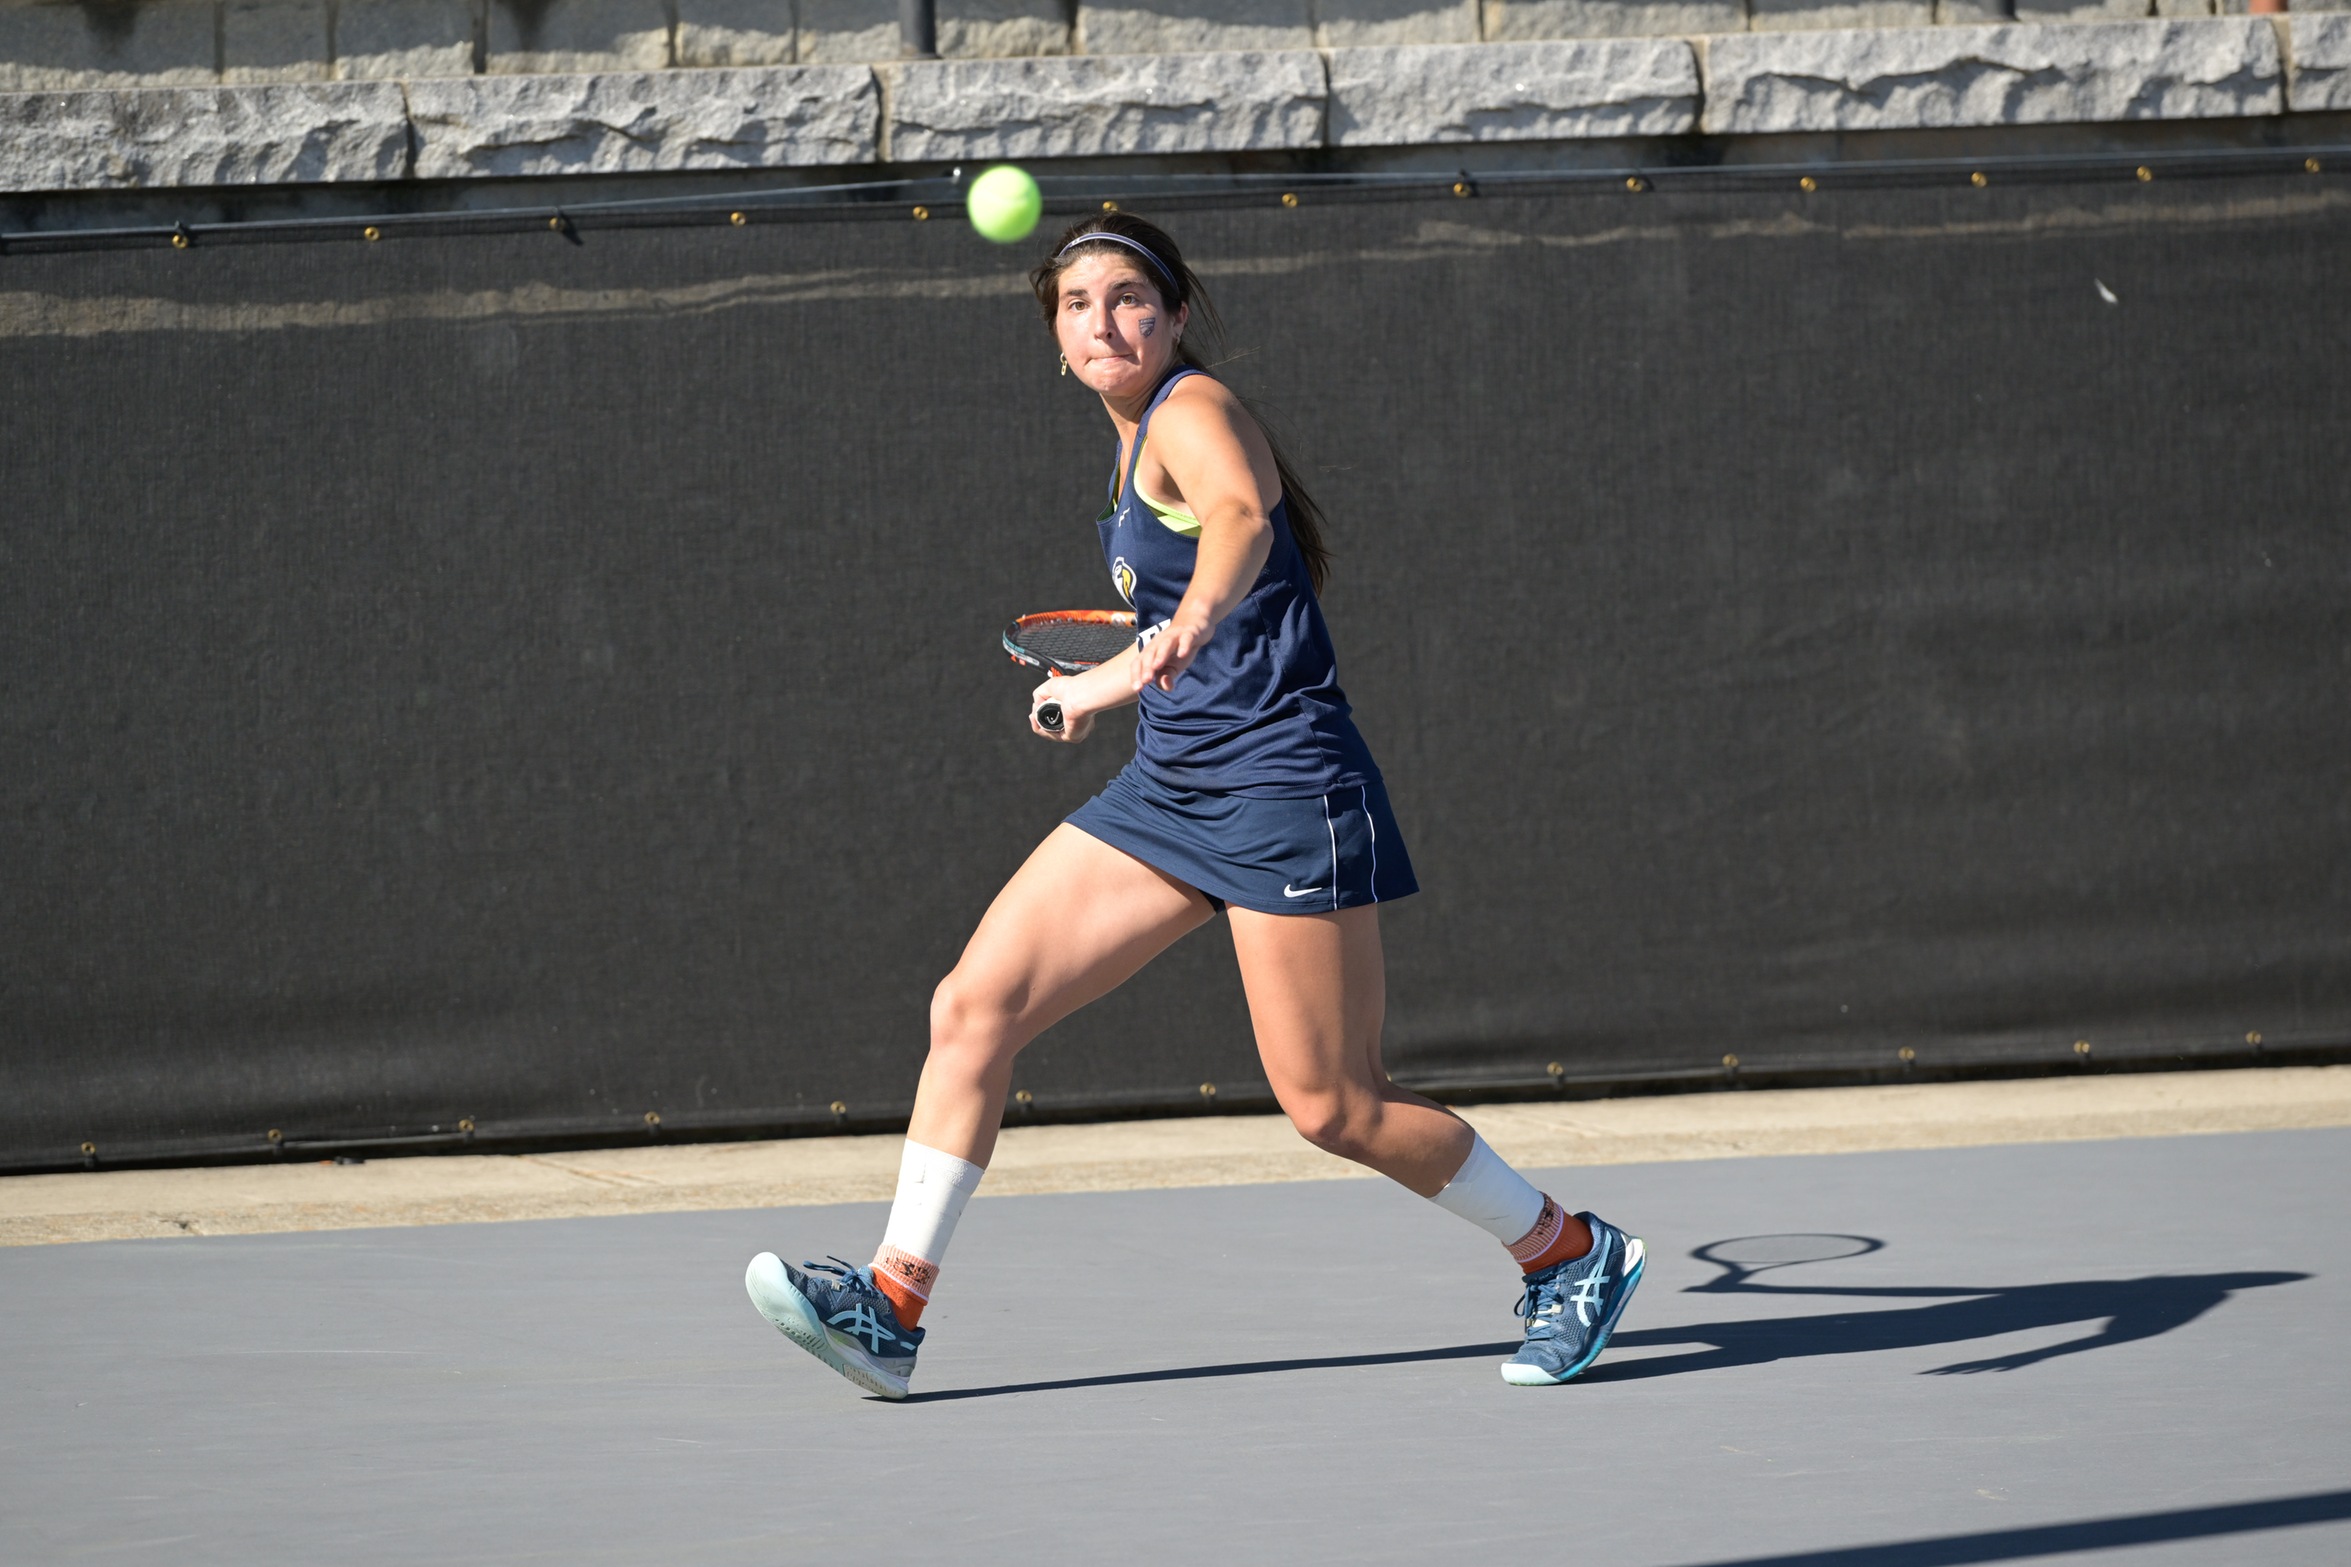 Eagles Dominate First Day of Singles and Doubles at ITA Fall Regional